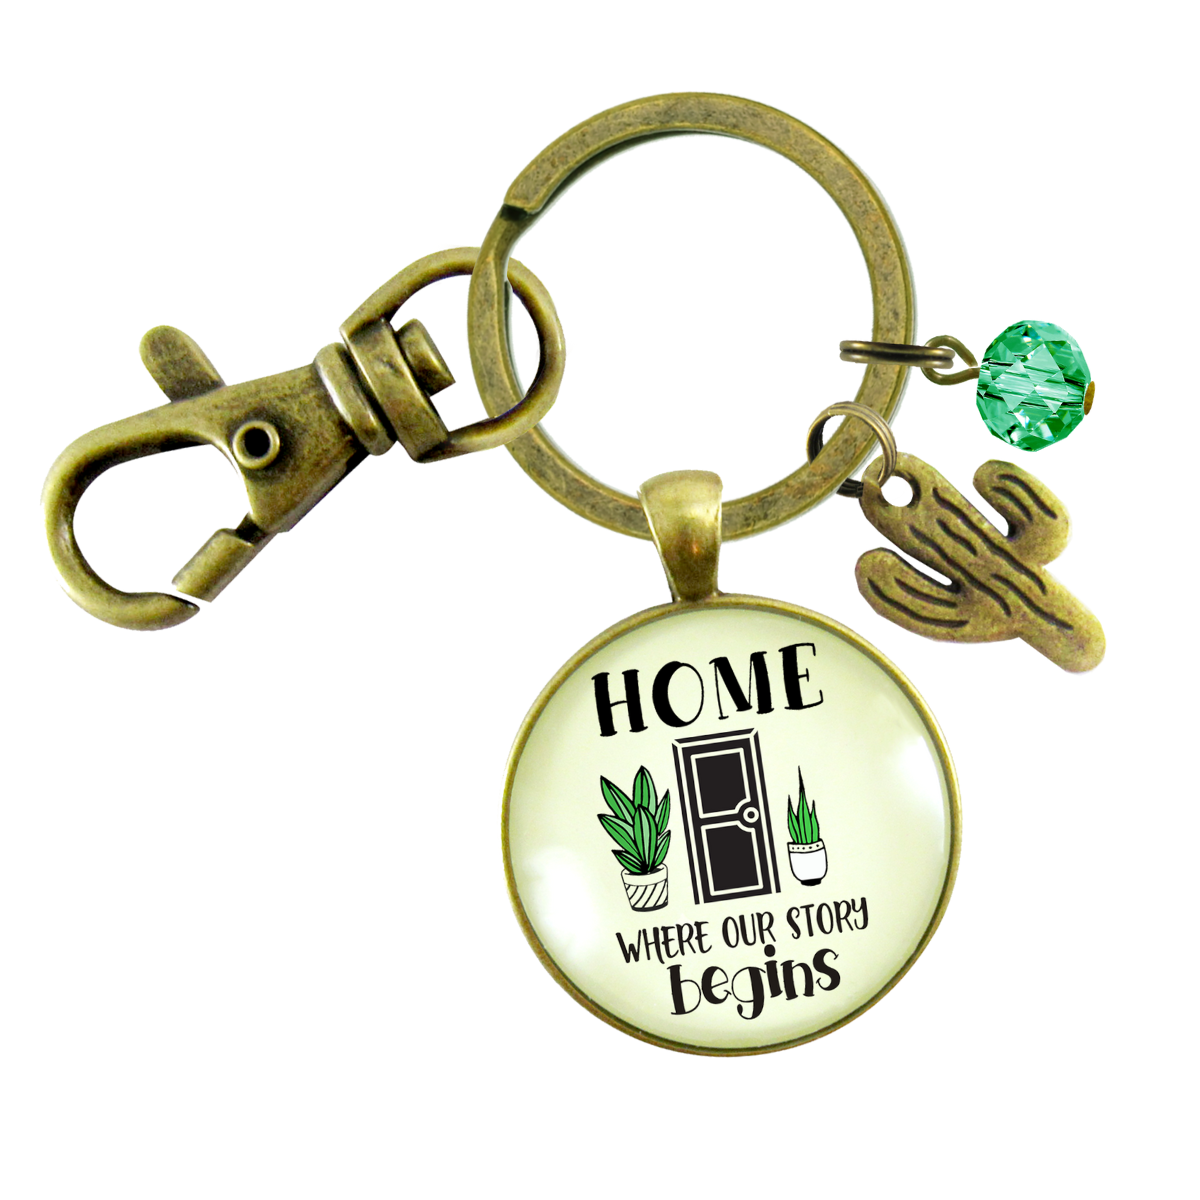 Home Where Our Story Begins Keychain First New House Southerwest Inspired Realtor Gift - Gutsy Goodness Handmade Jewelry;Home Where Our Story Begins Keychain First New House Southerwest Inspired Realtor Gift - Gutsy Goodness Handmade Jewelry Gifts